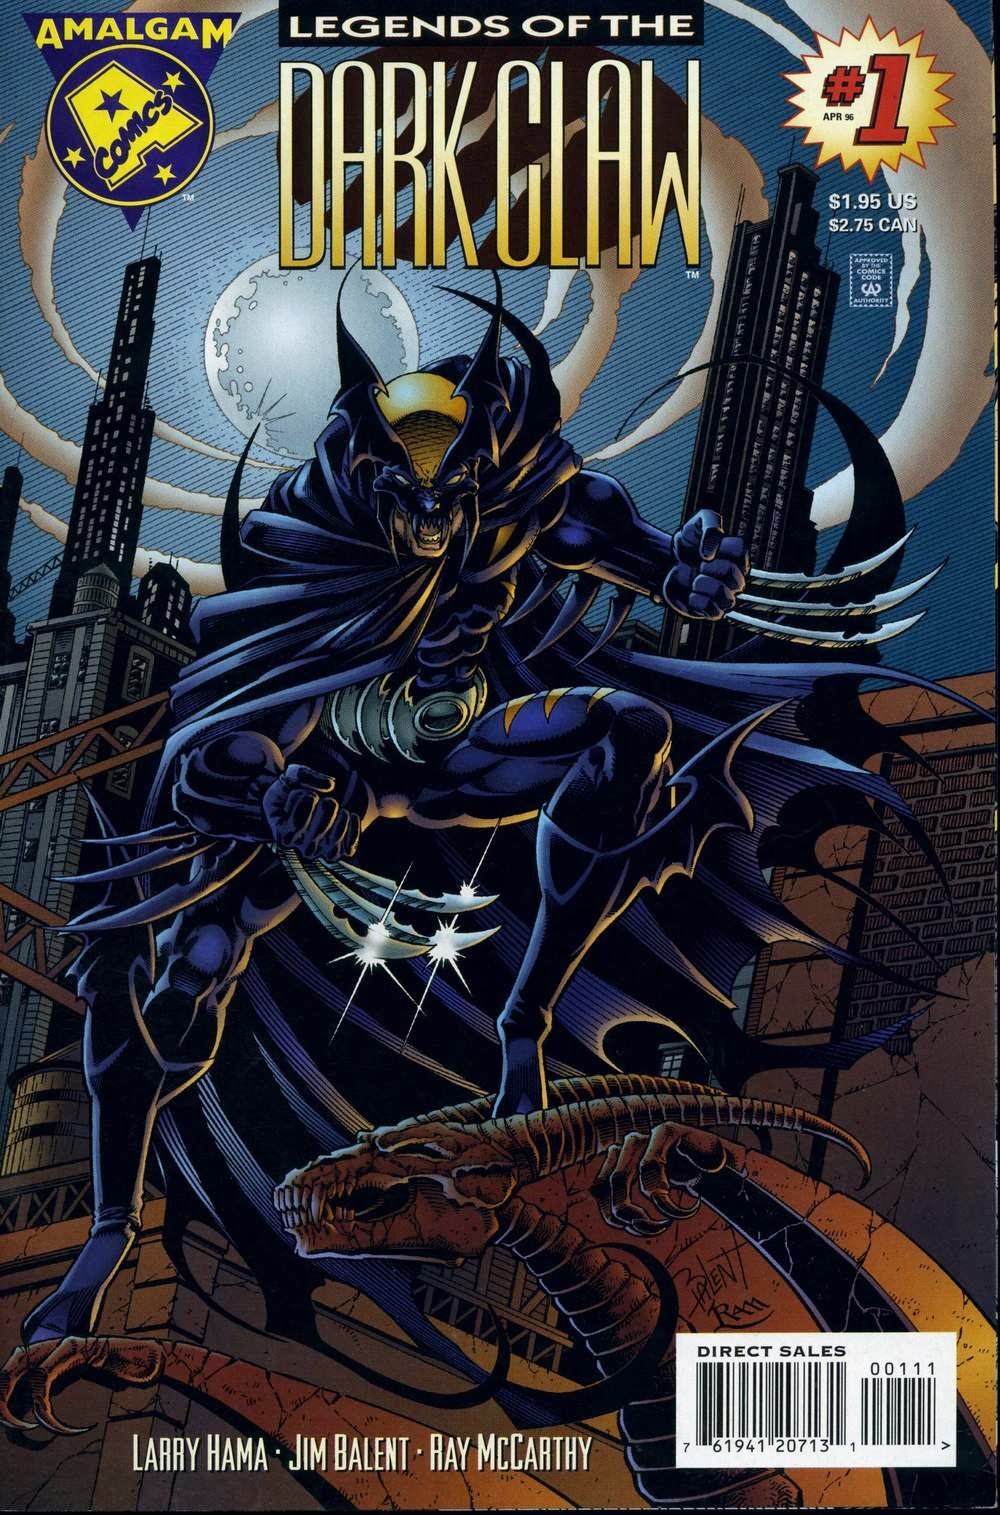 Cover of legend of the dark claw #1. Dark Claw against a night cityscape. National Comics Day 2020